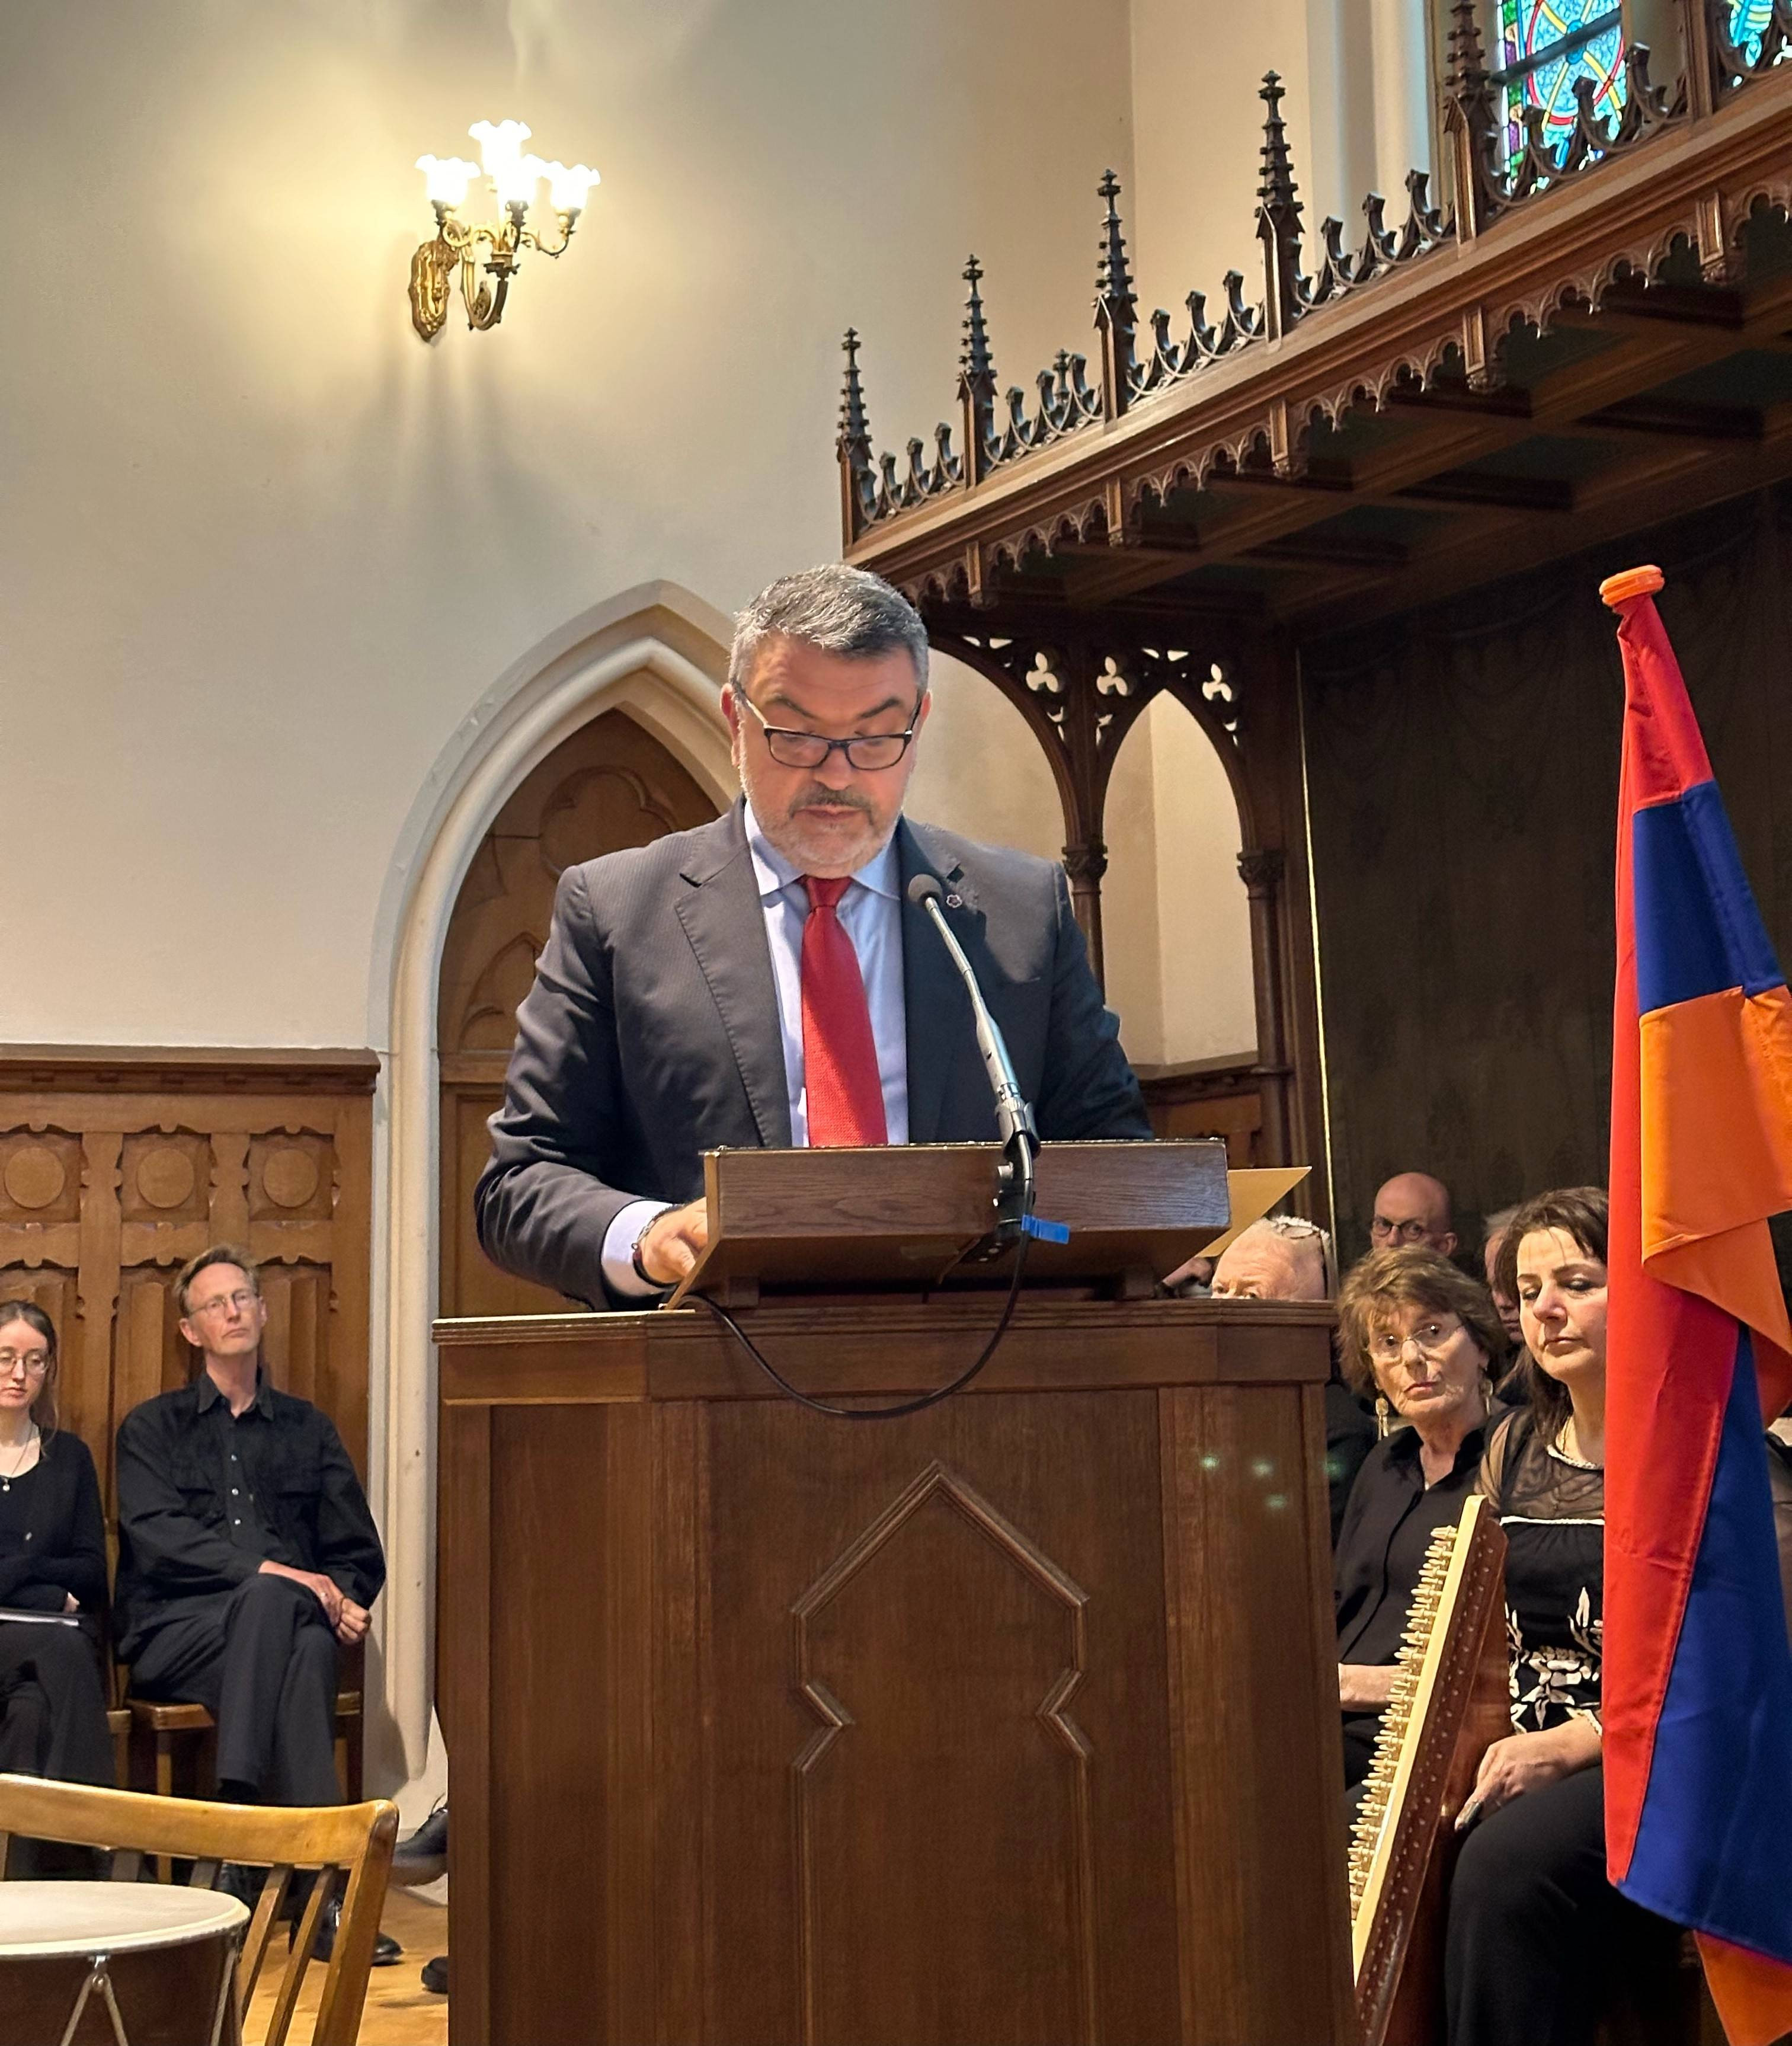 Remarks of H.E. Viktor Biyagov, Ambassador of Armenia at the Concert Dedicated to the 109th Anniversary of the Armenian Genocide